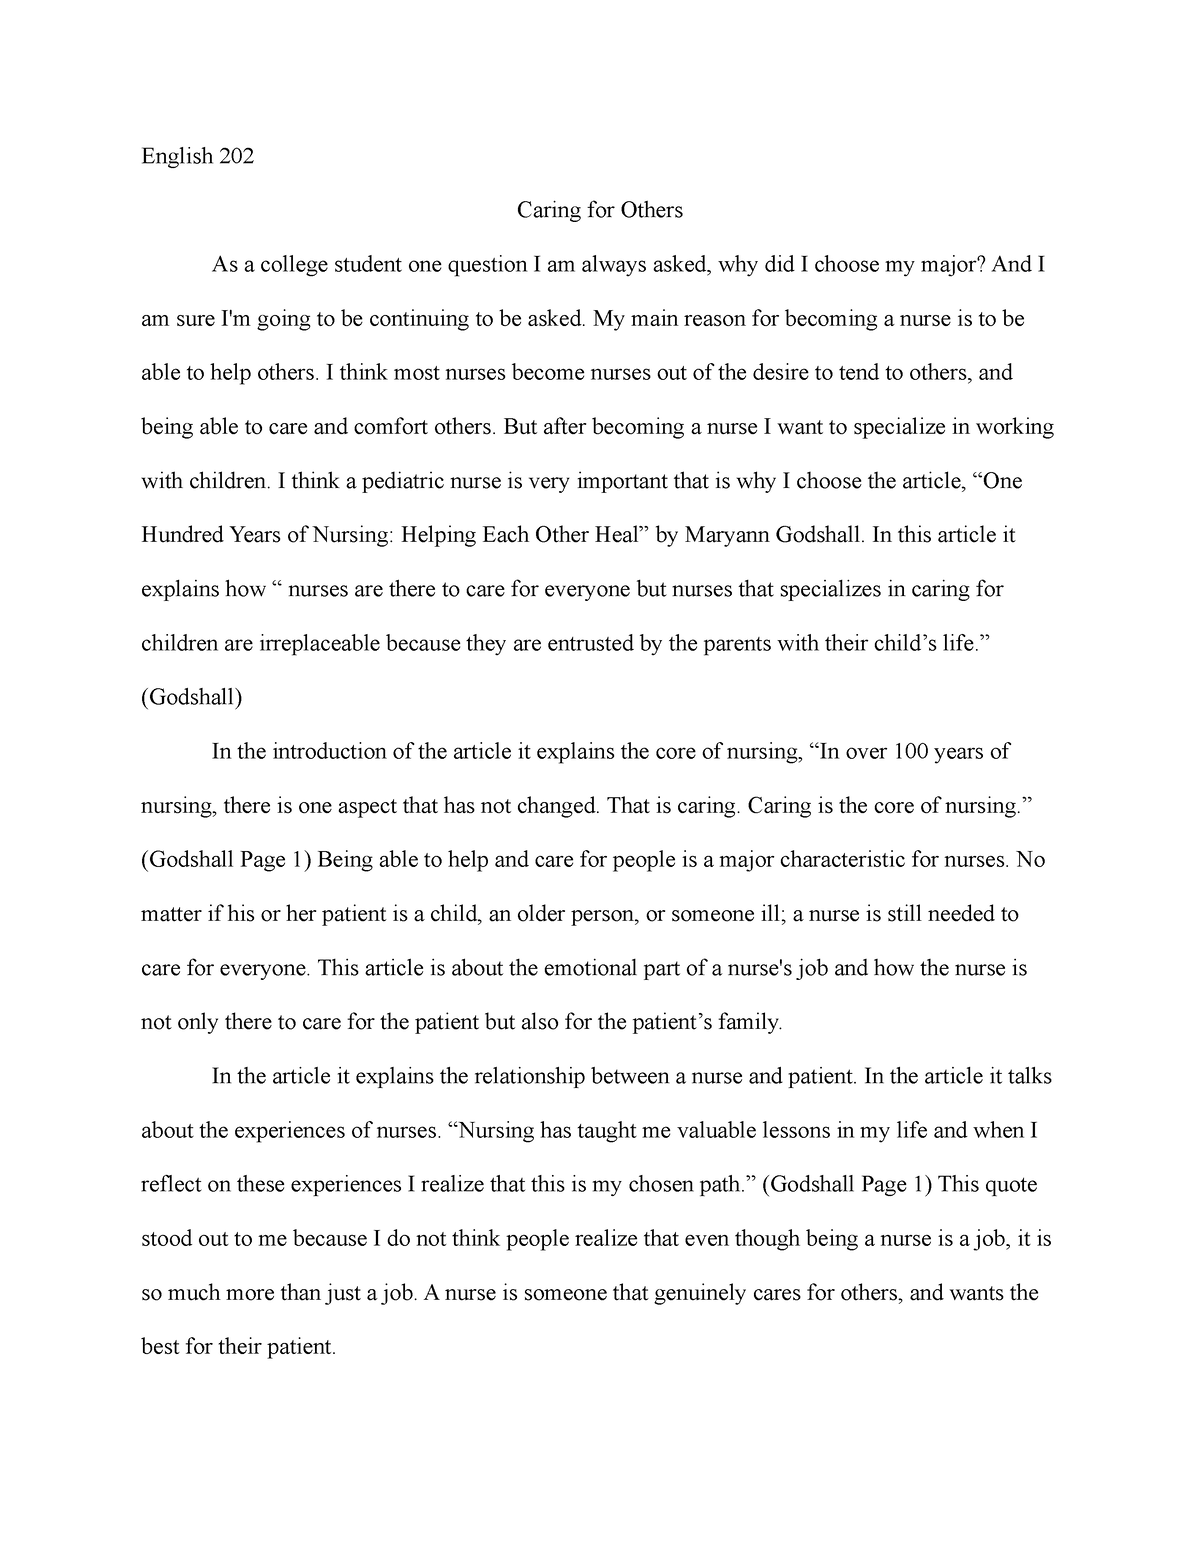 essay-three-final-english-202-caring-for-others-as-a-college